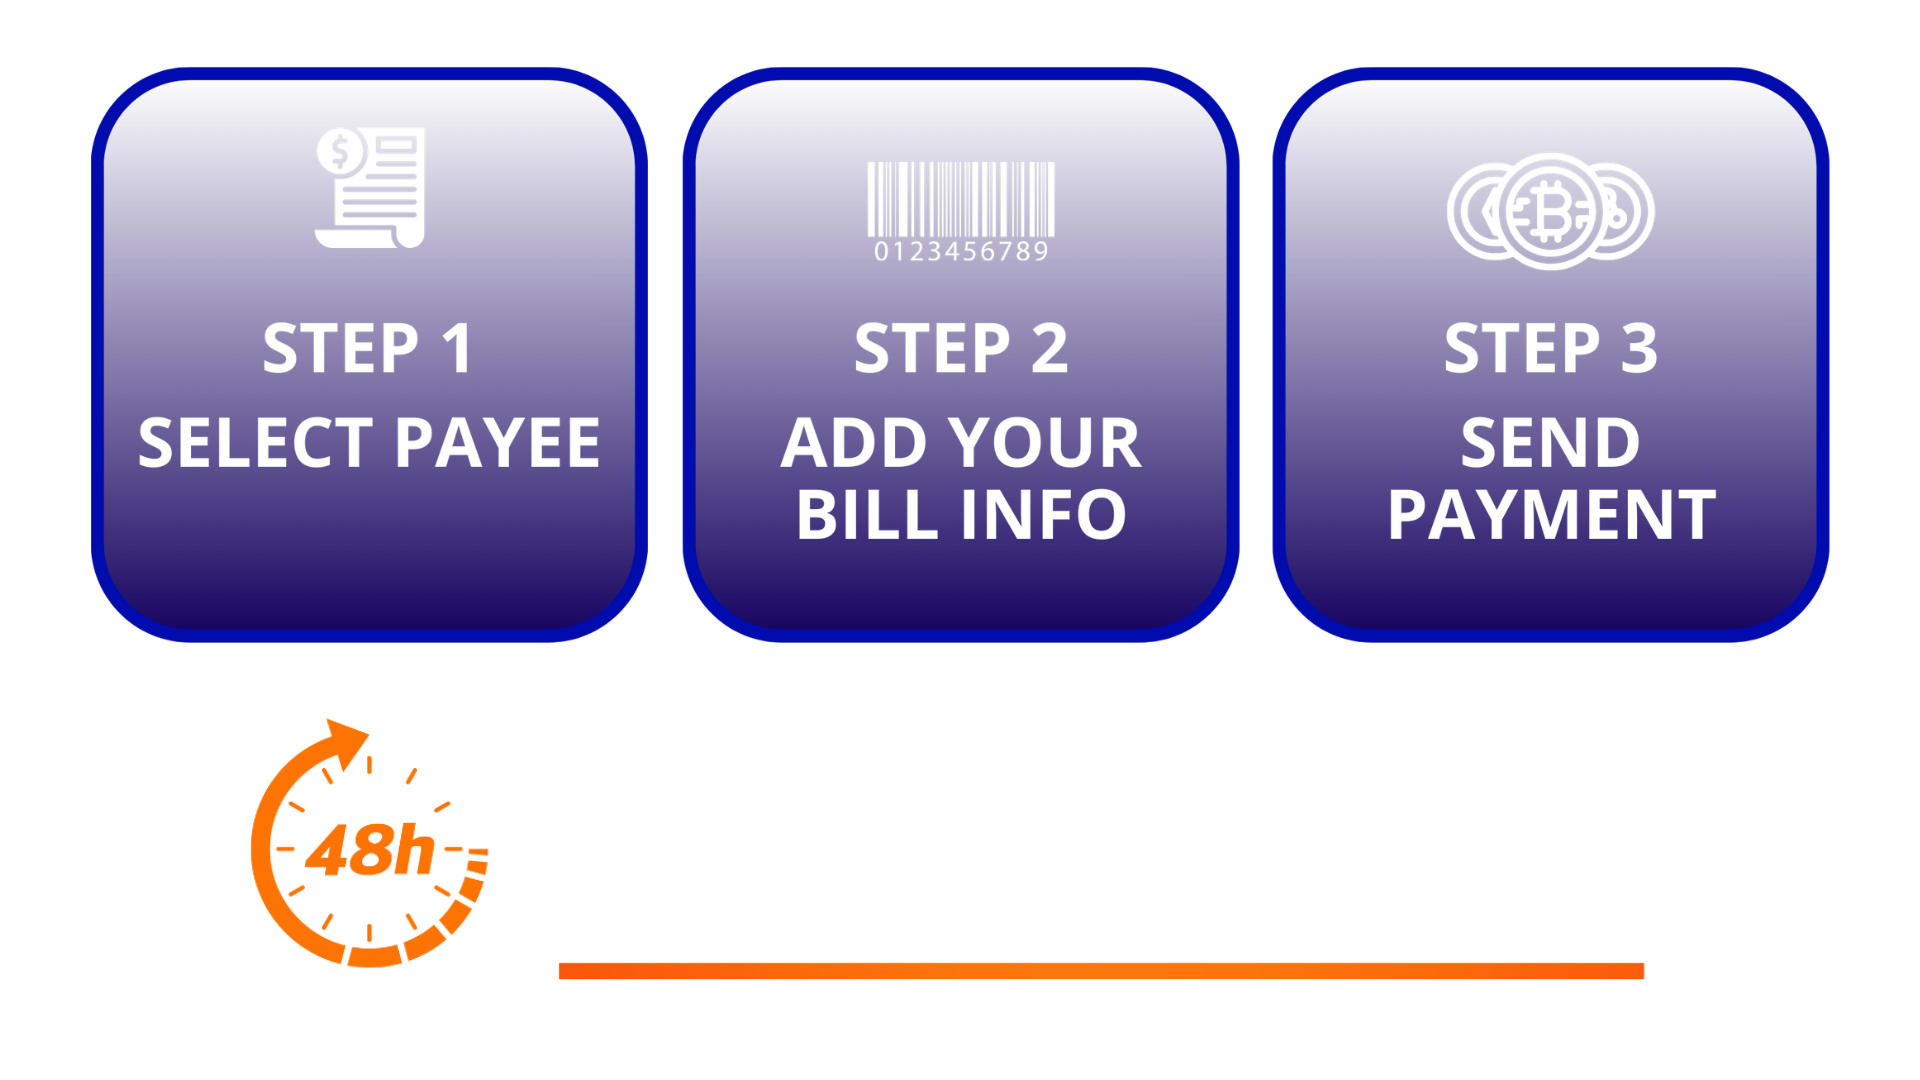 fcfpay.com/bill-payments payment flow of how to pay your bills